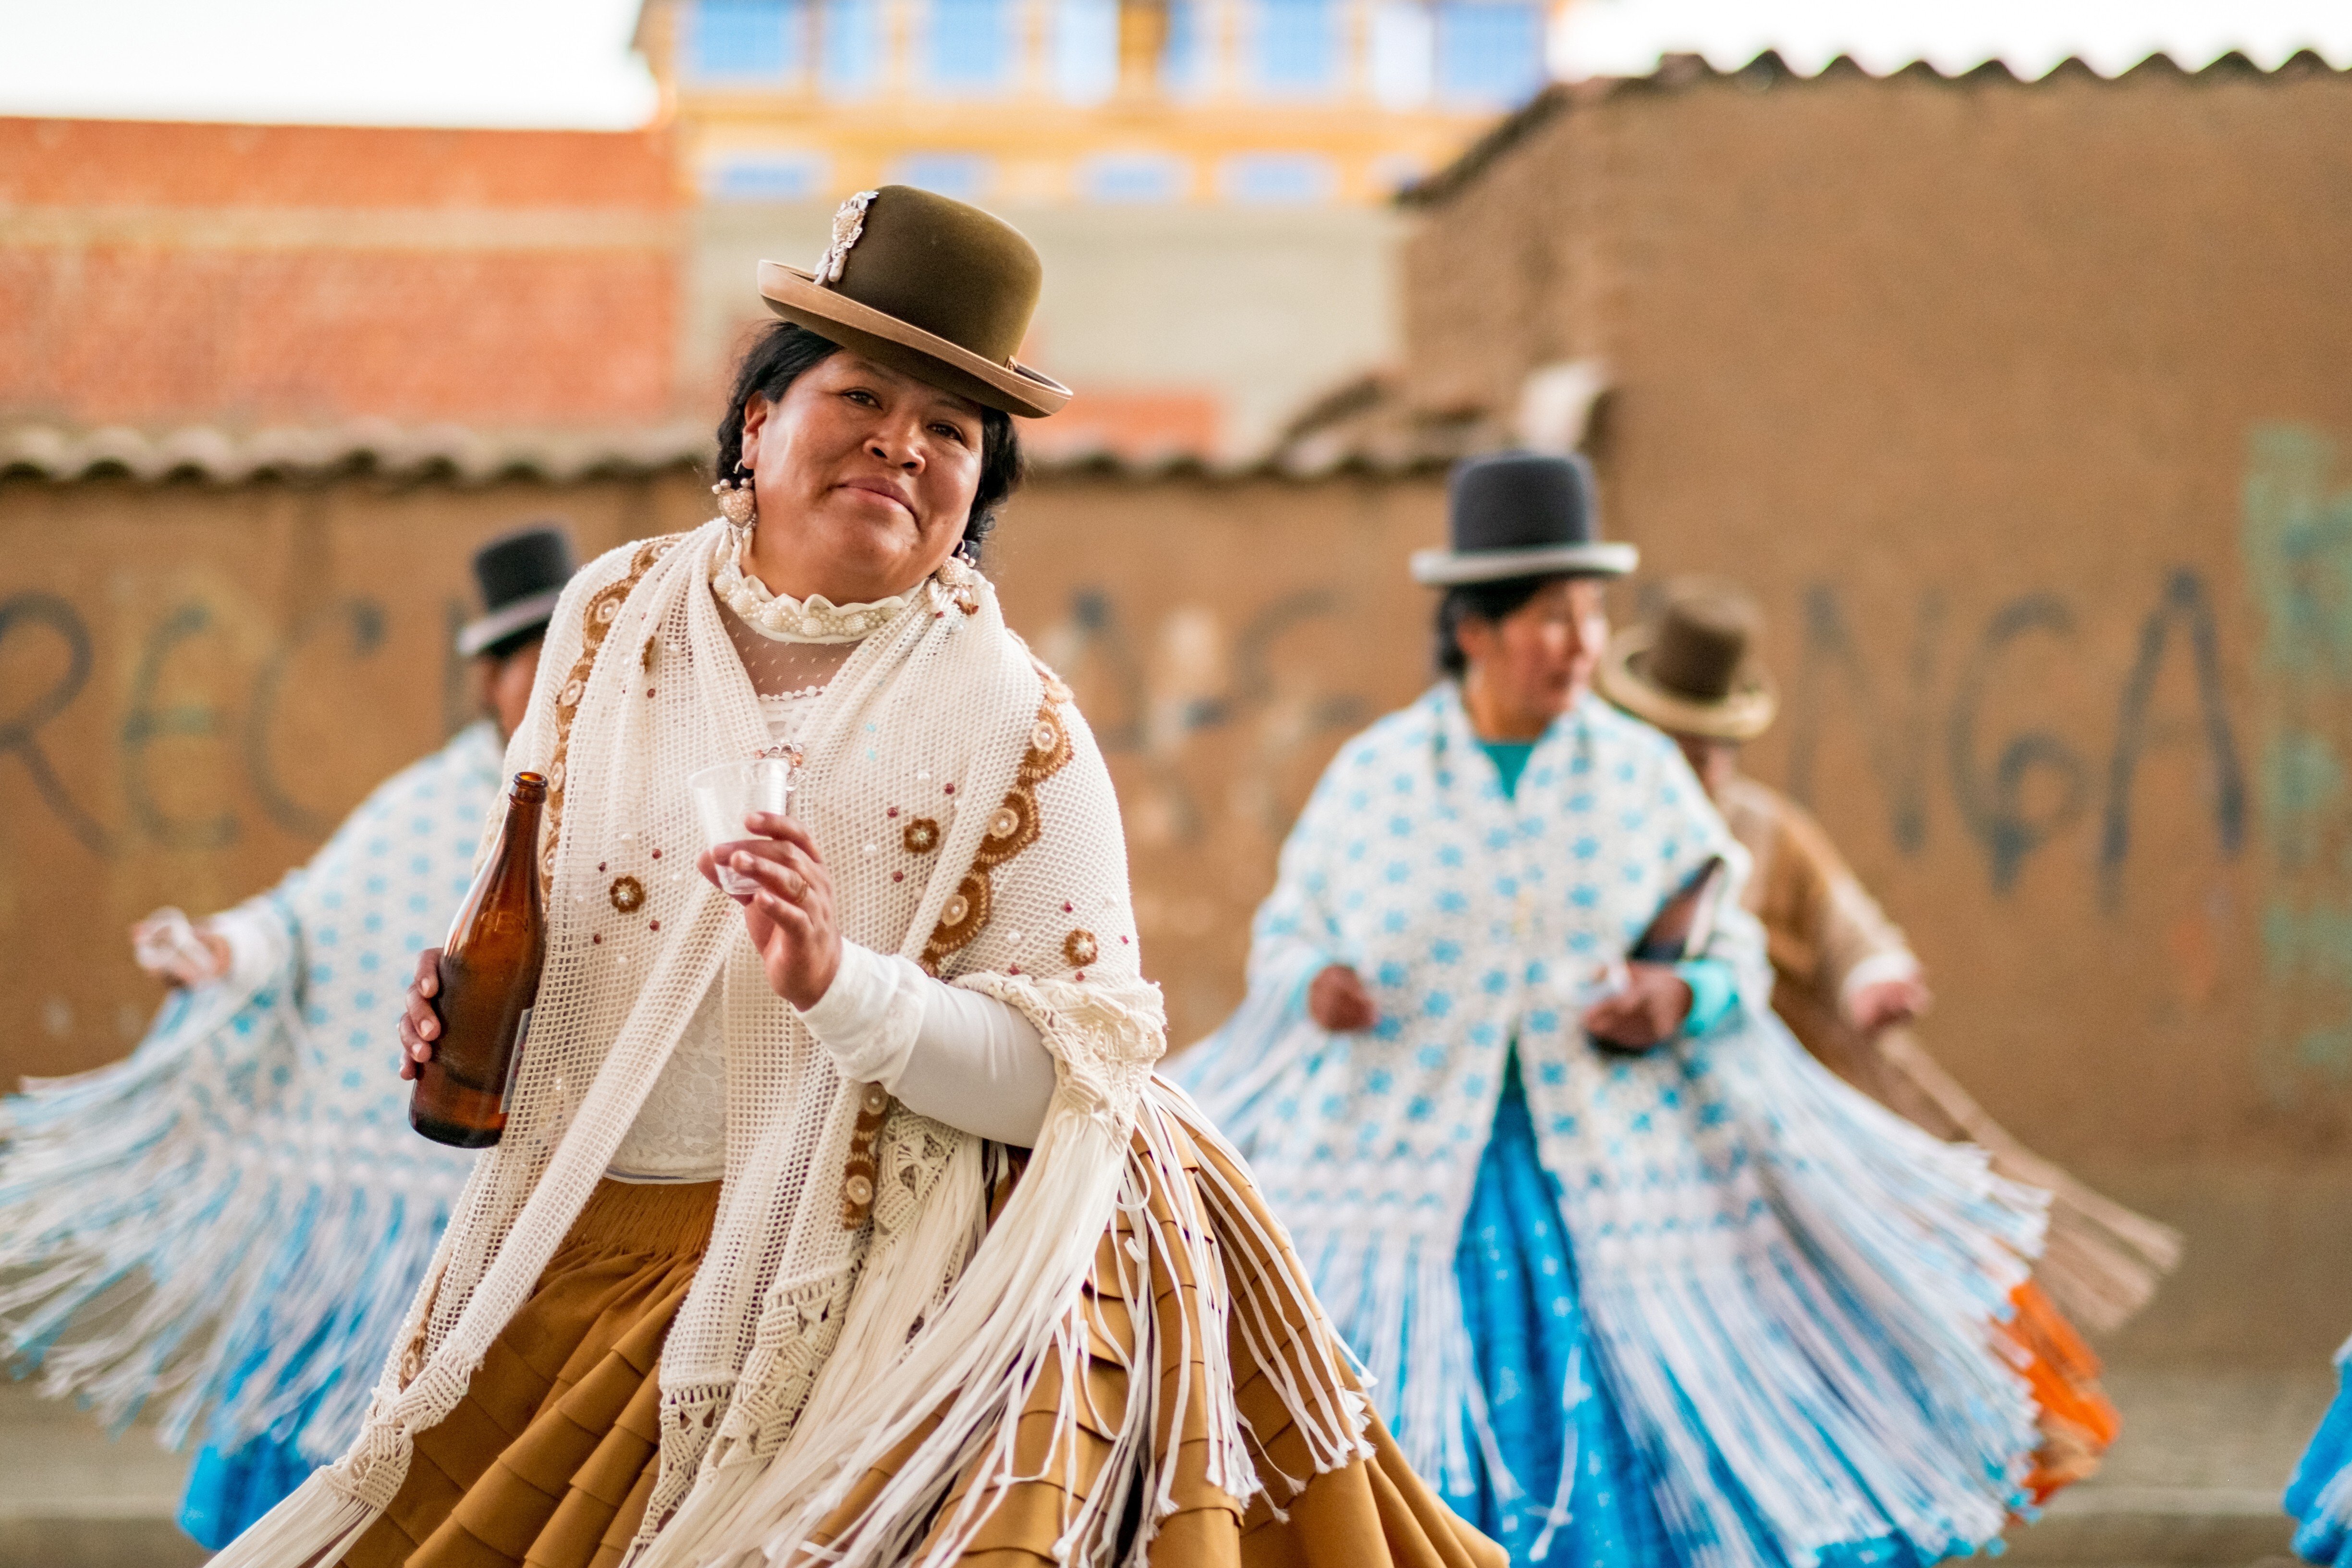 From saris in India to bowler hats in Bolivia – around the world